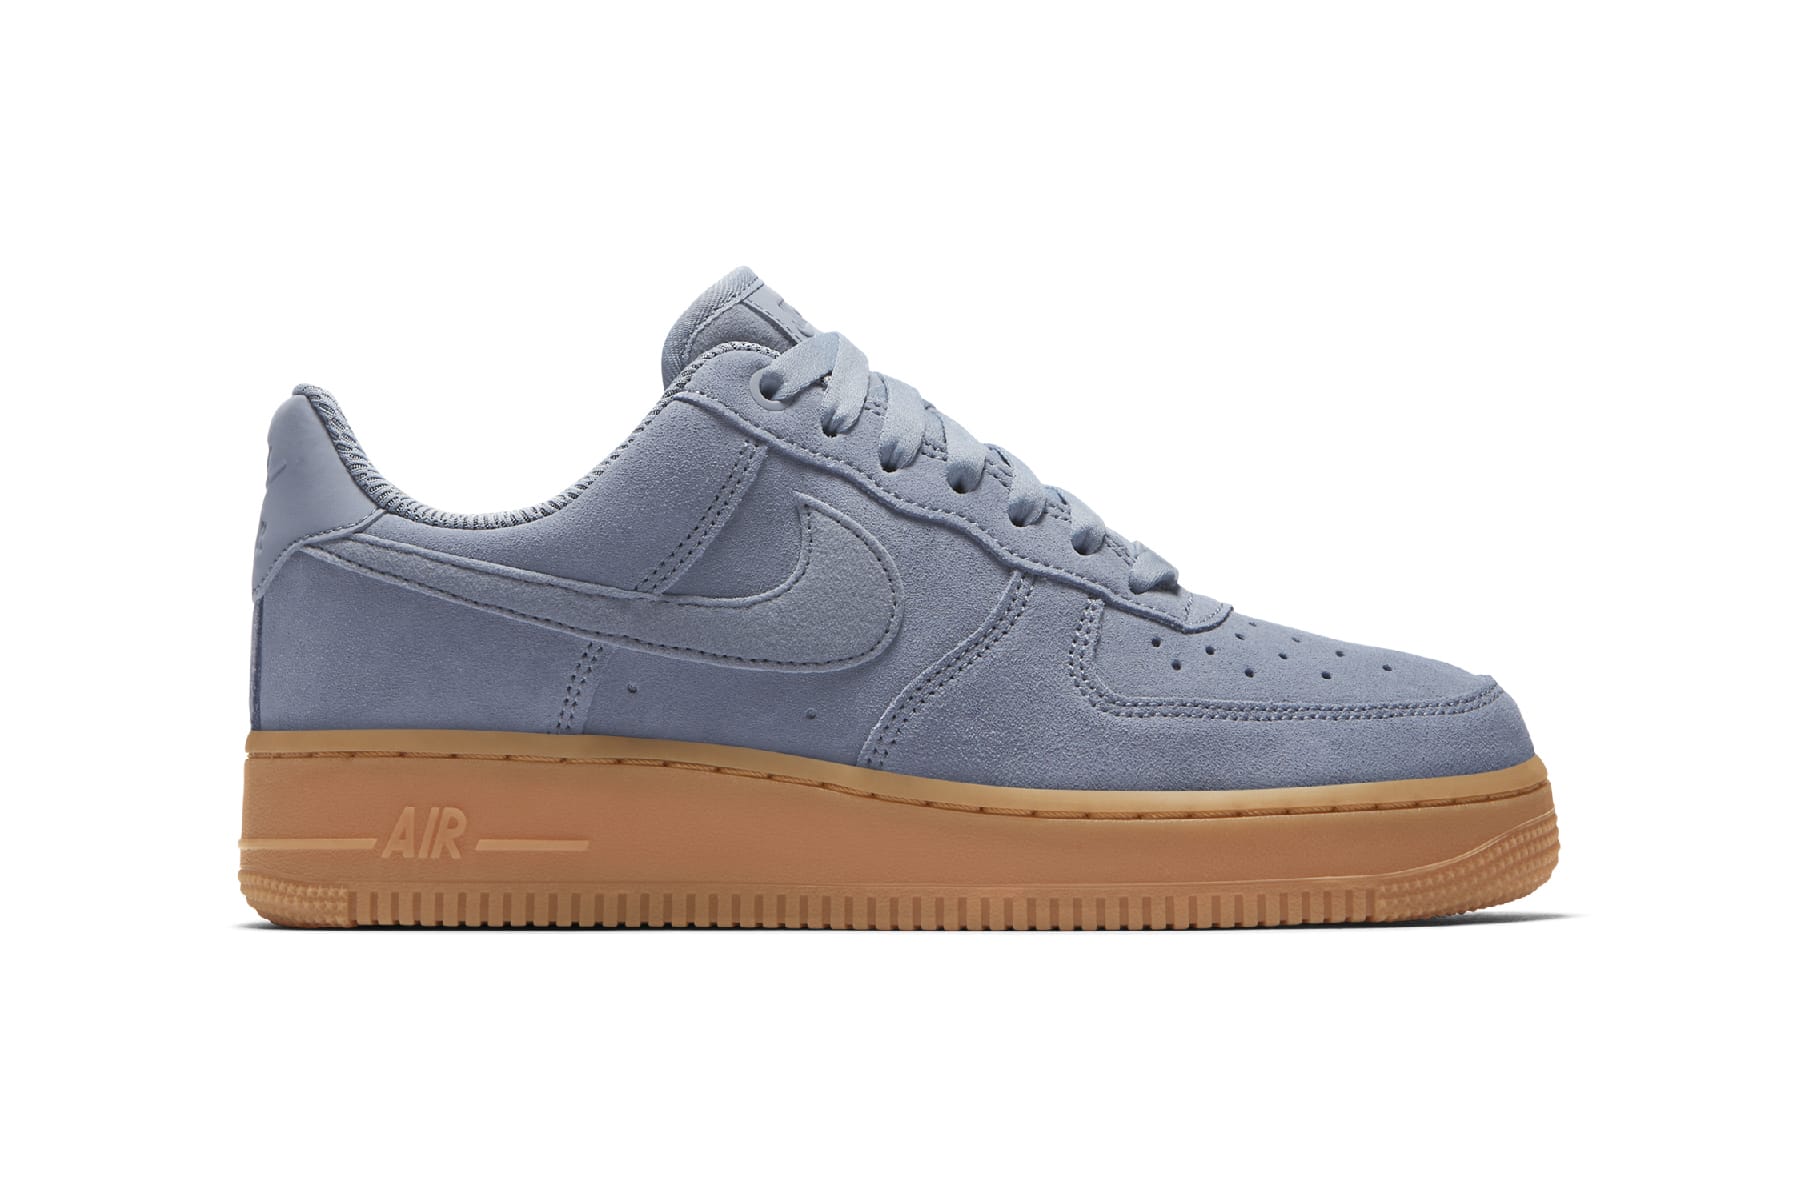 air force 1 suede gum sole